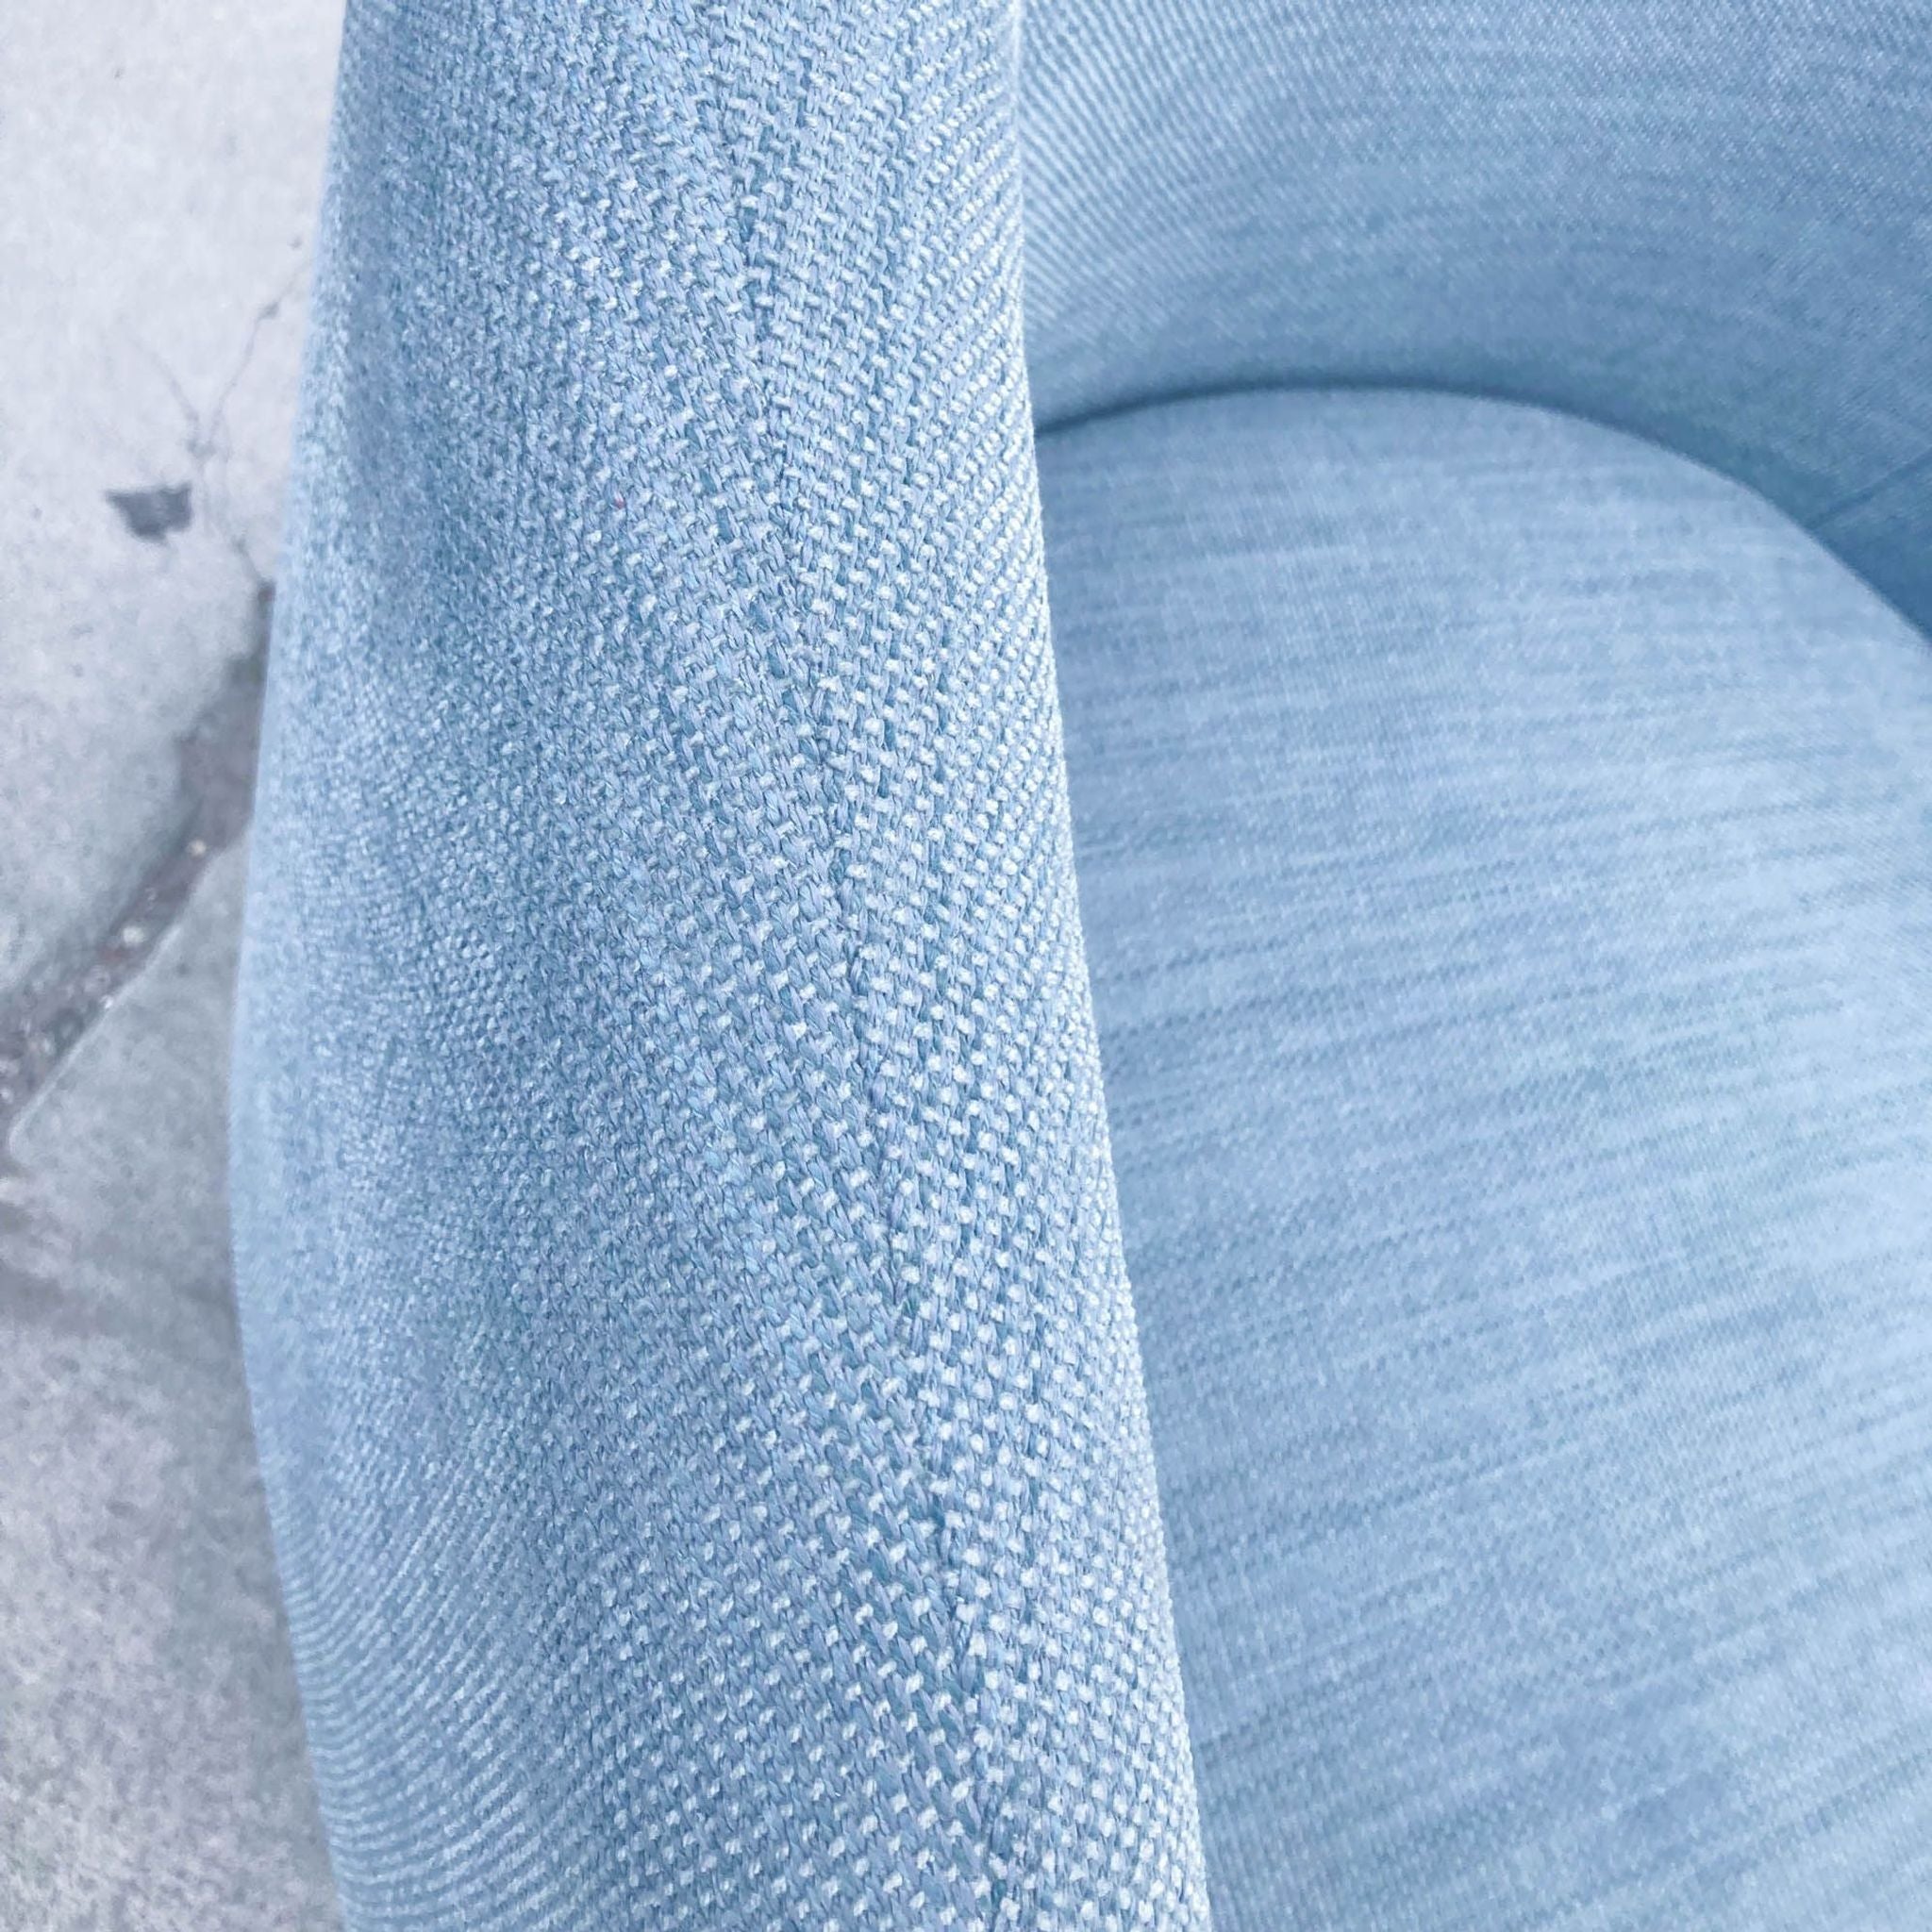 2. Close-up of the Crescent lounge chair's textured blue upholstery by West Elm, highlighting the weave fabric.